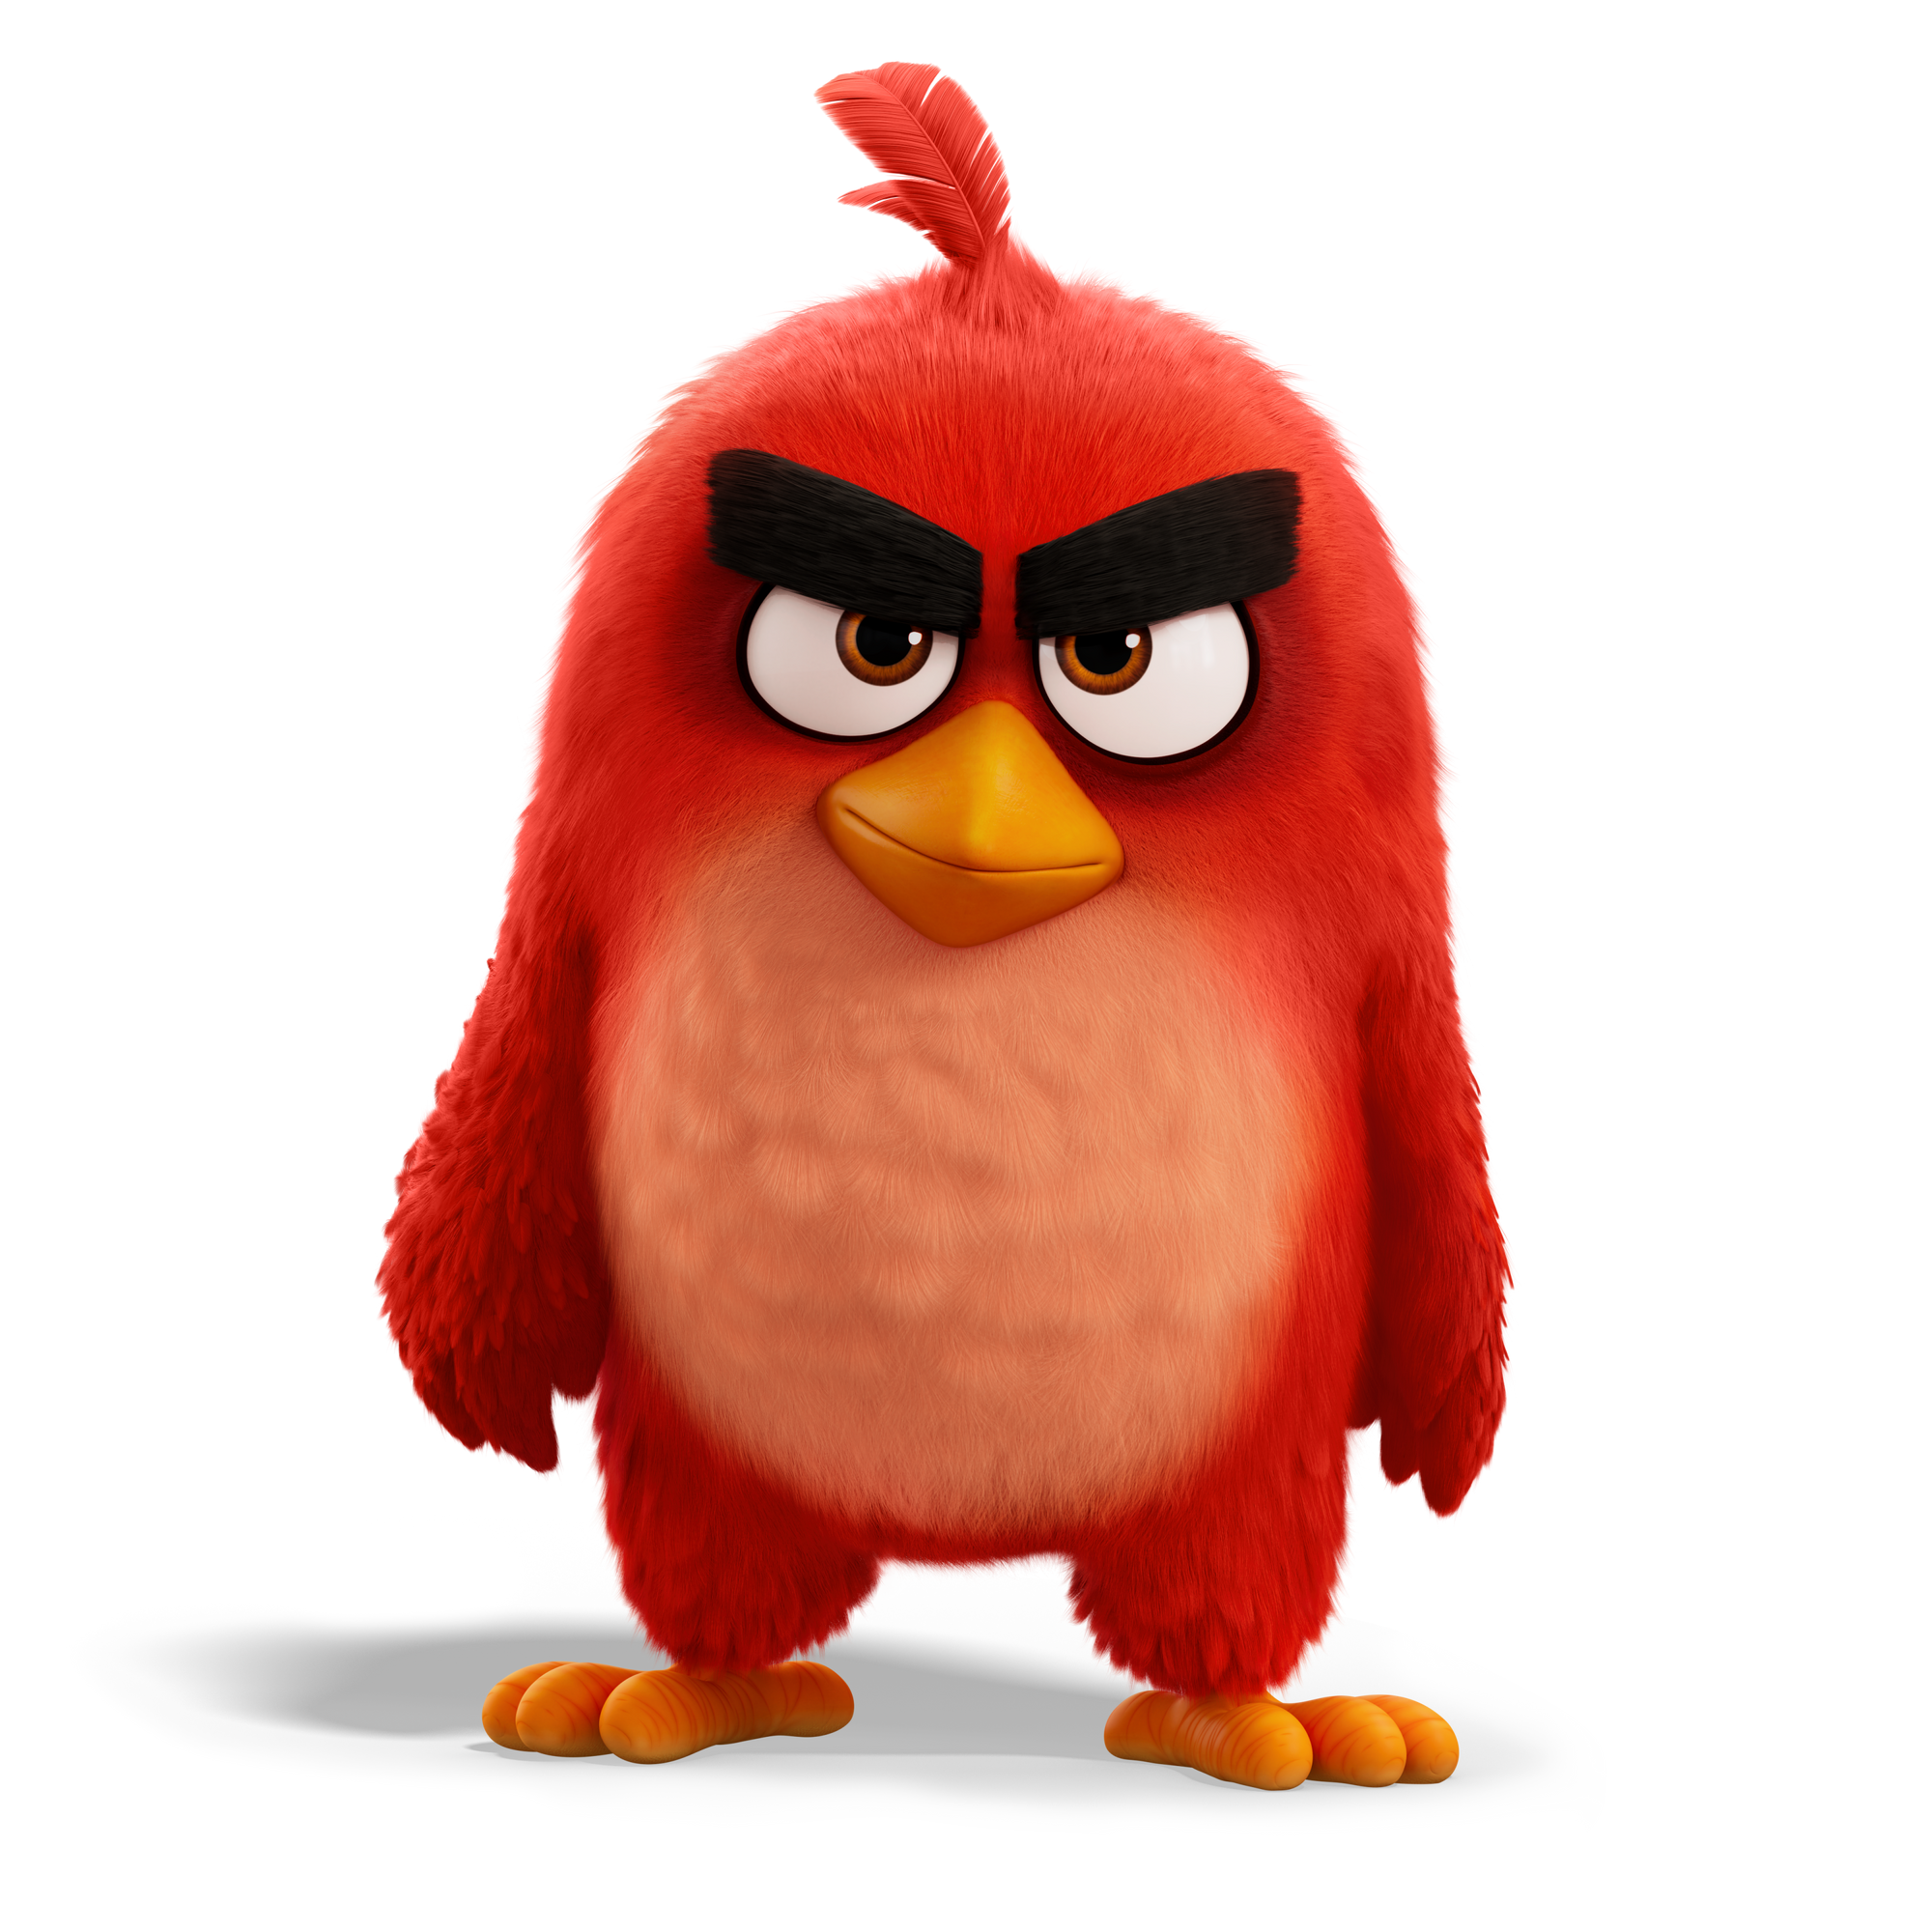 The Angry Birds Movie 2/Gallery | Angry Birds Wiki